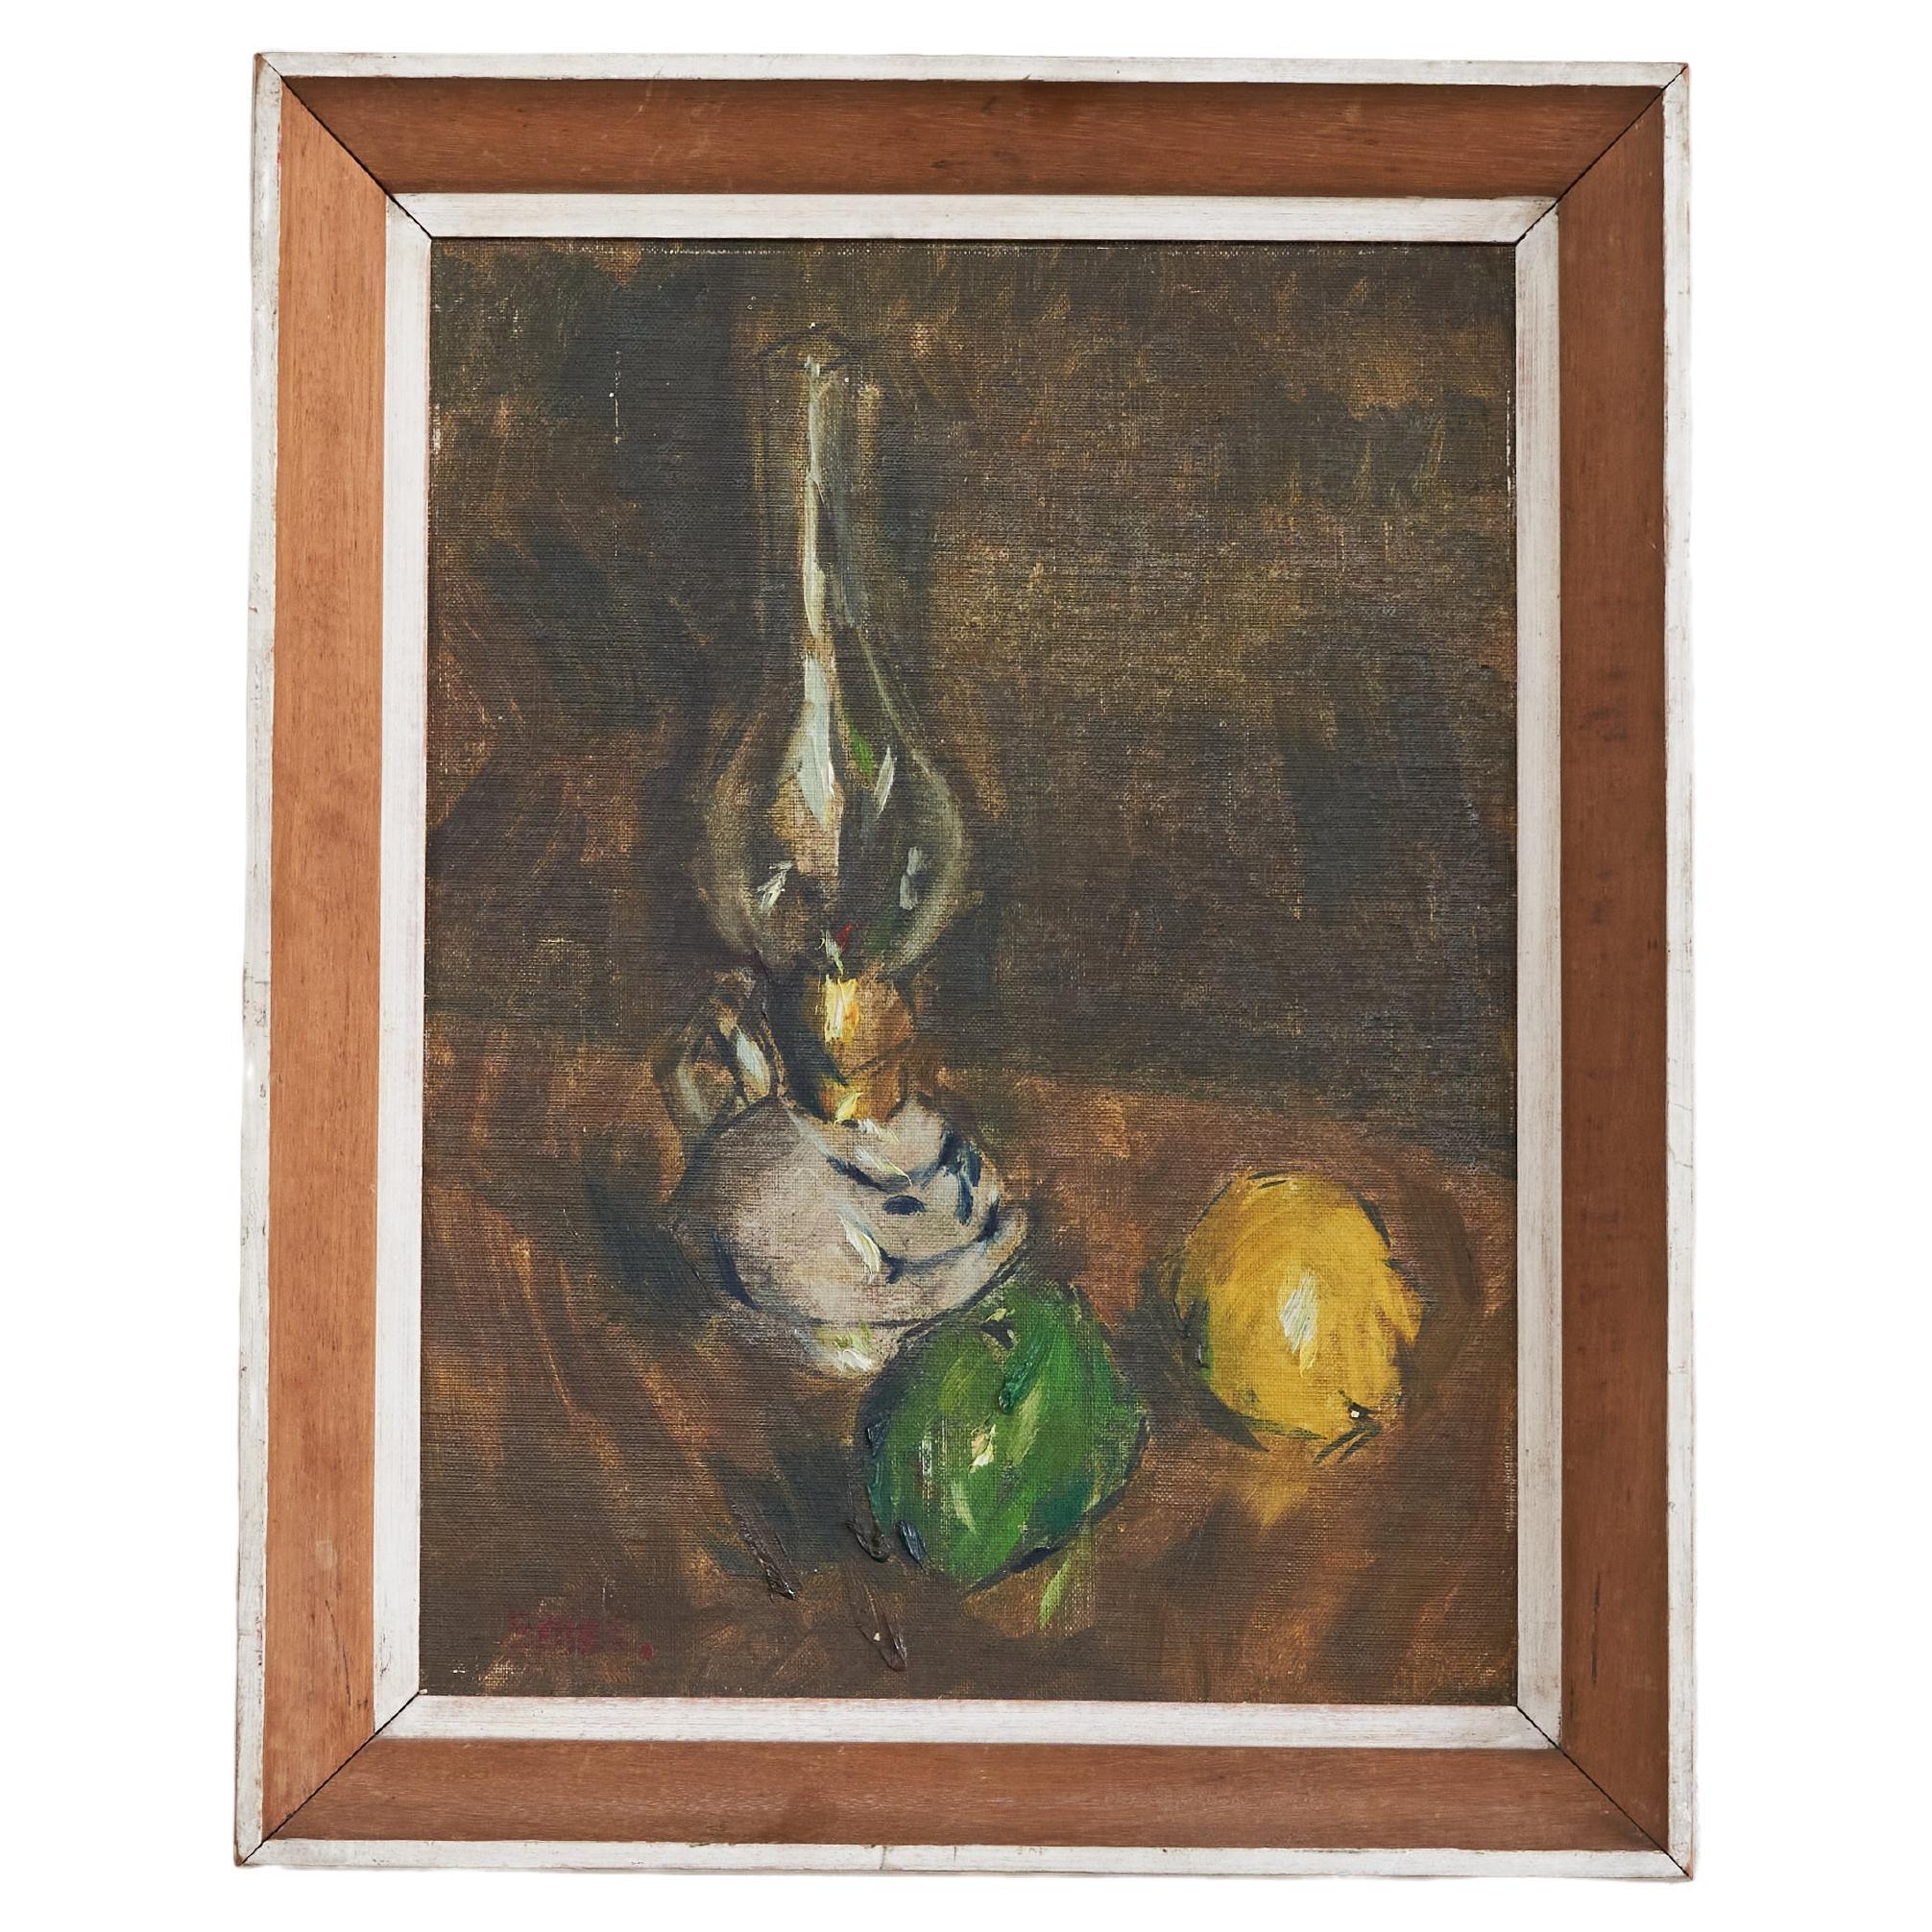 Gustave de Smet 'Still Life with Oil Lamp and Fruit' Oil on Board 1930s For Sale